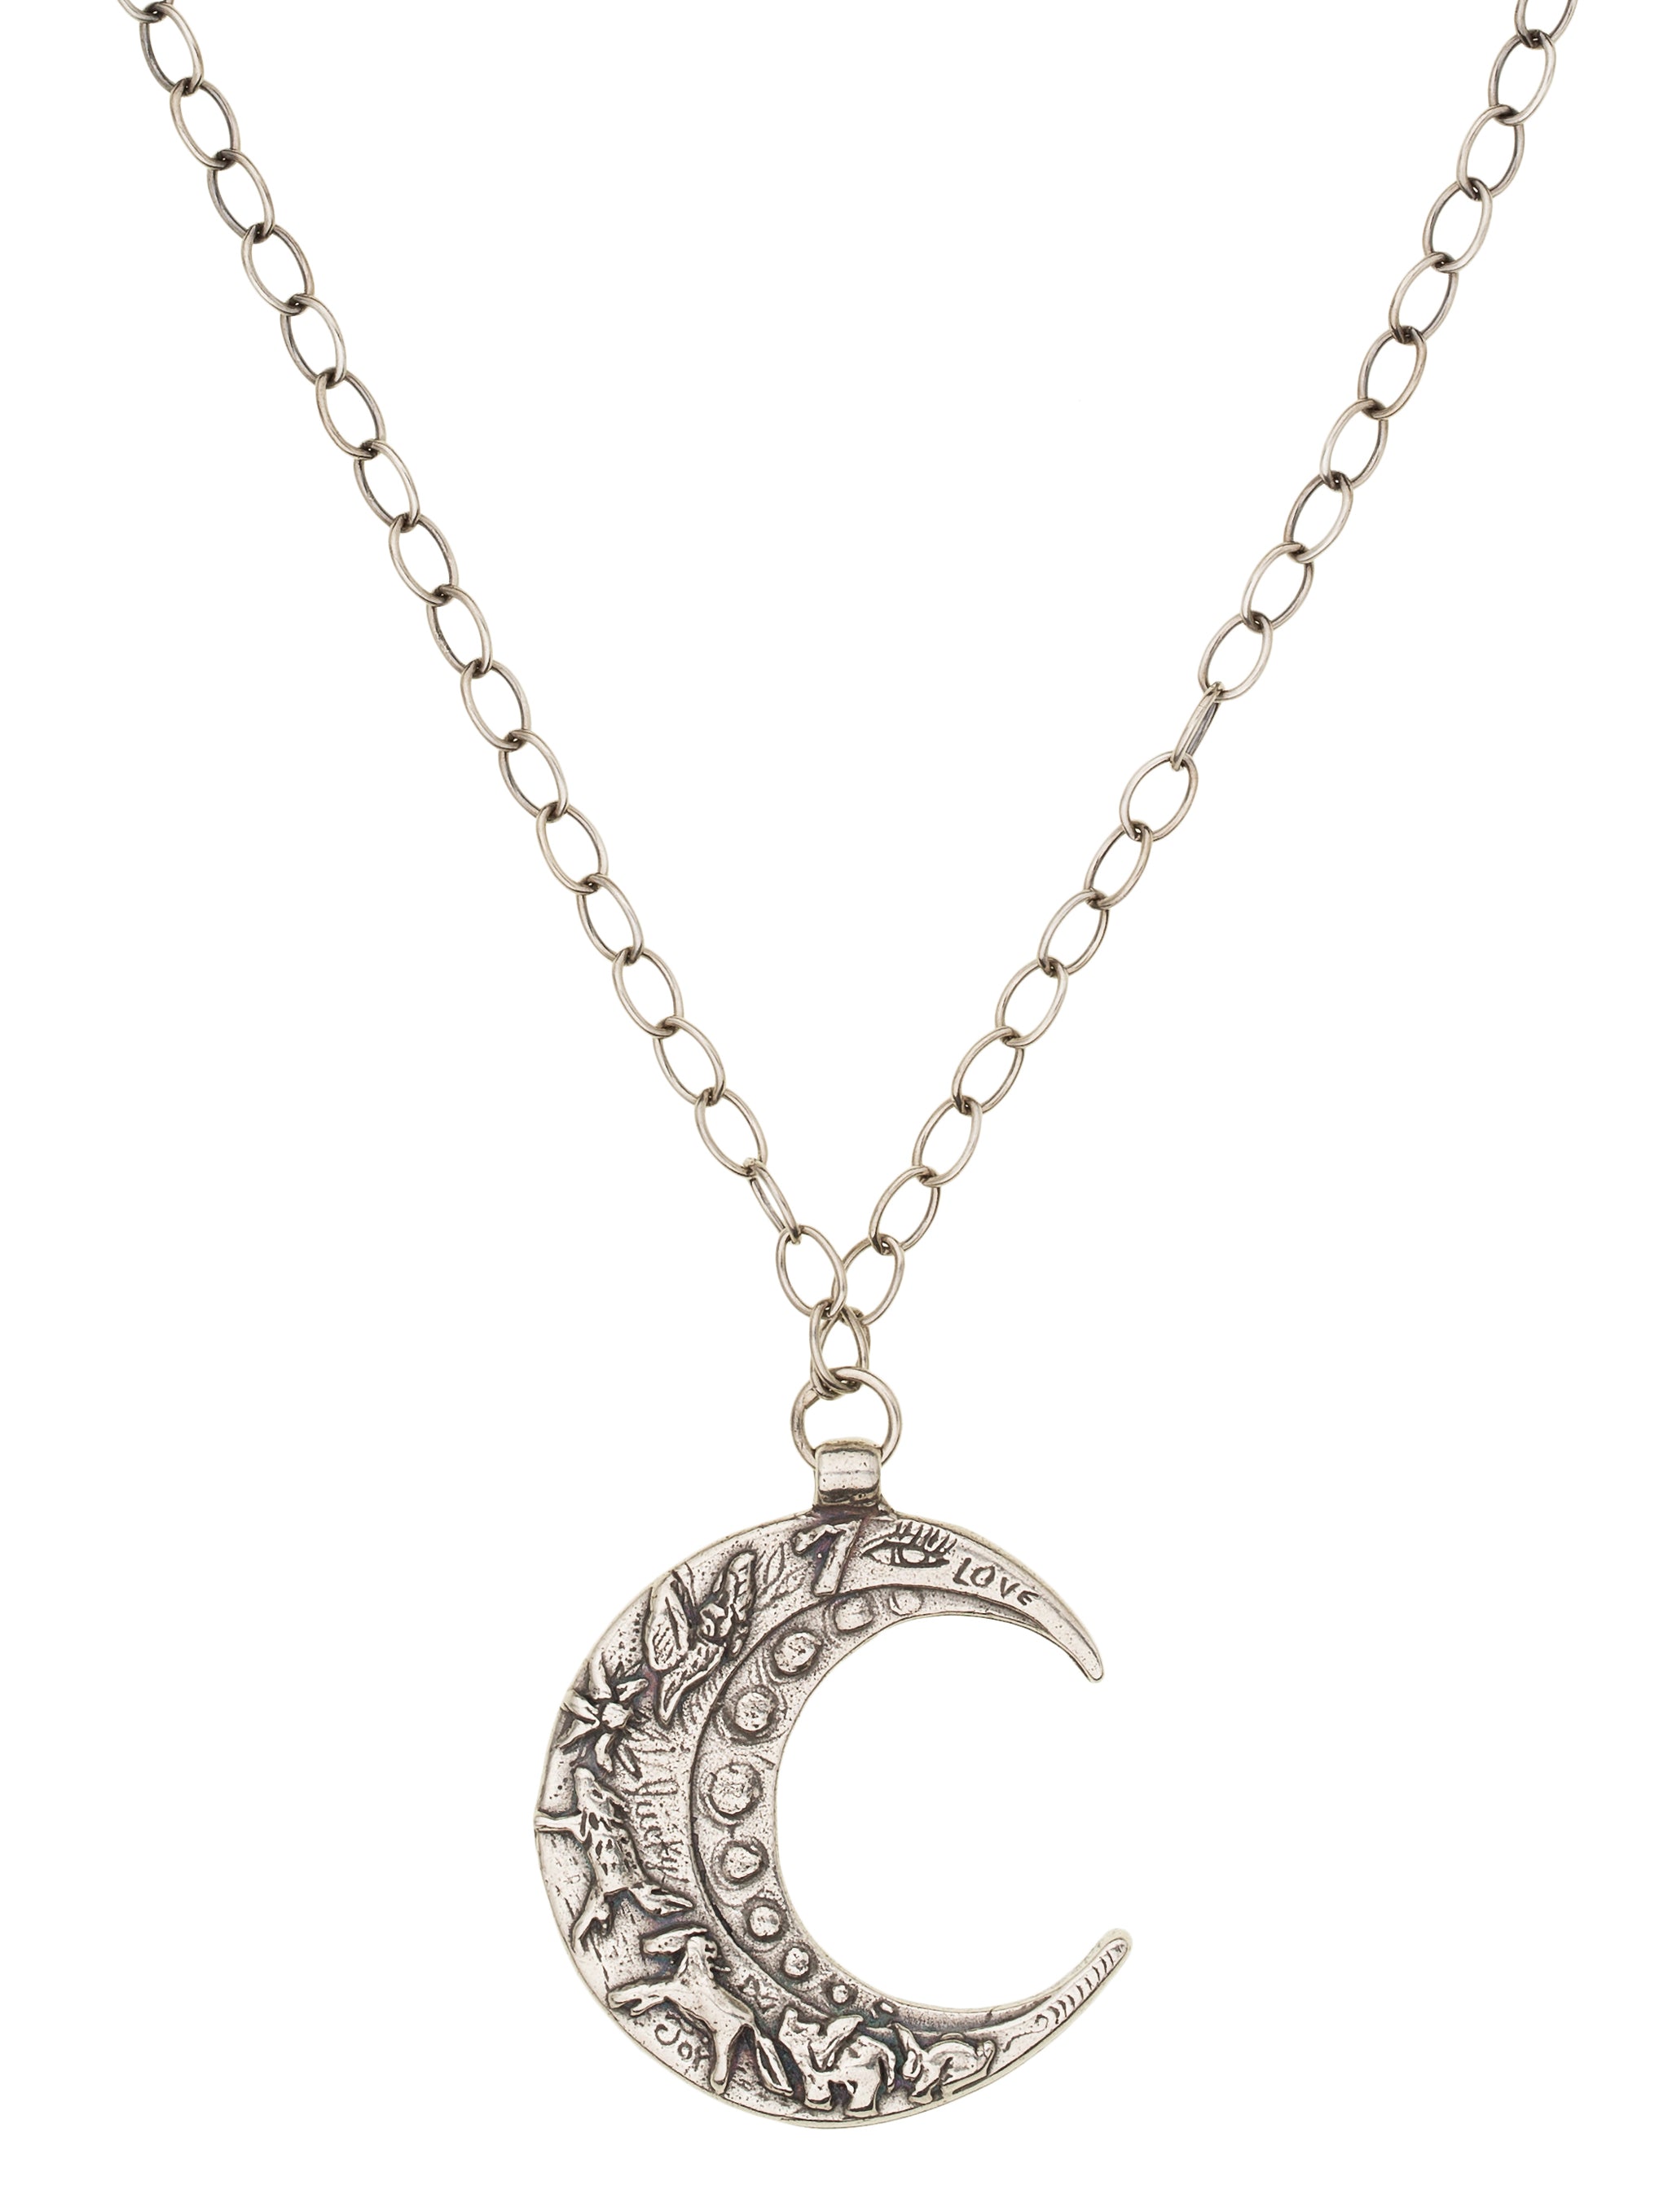 Dancing on the Moon Necklace